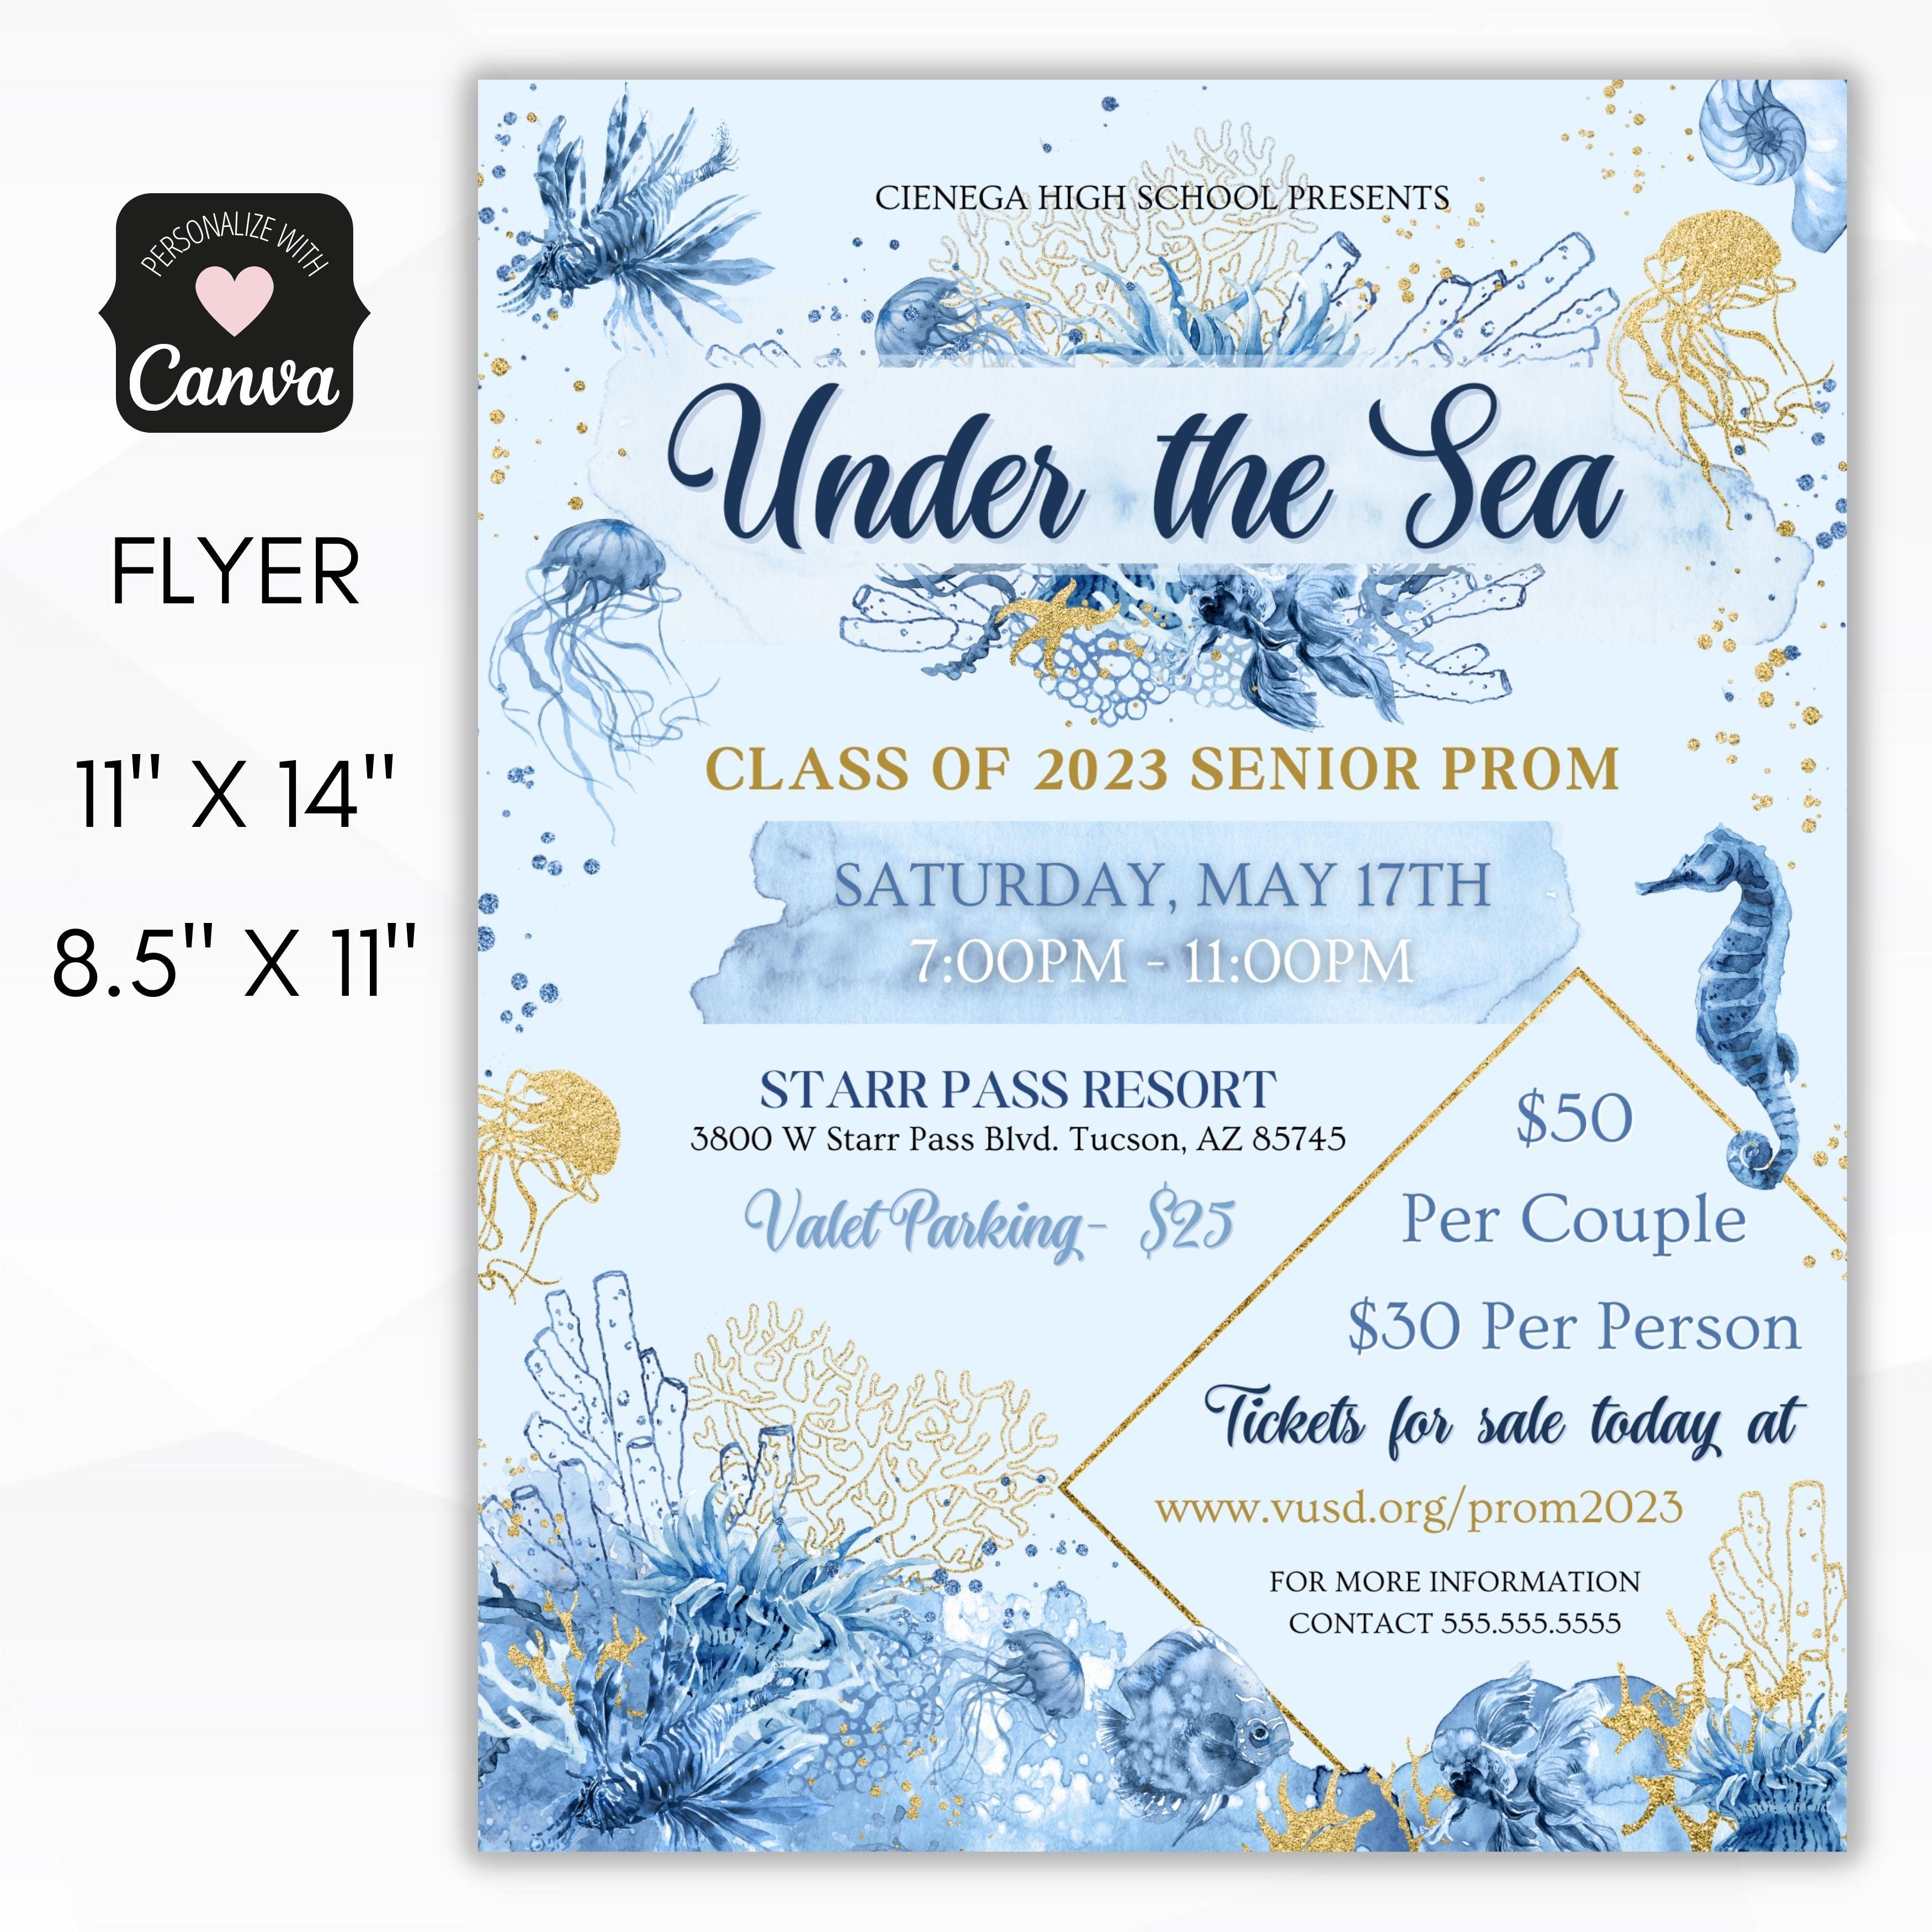 Under the Sea Prom Flyer Set